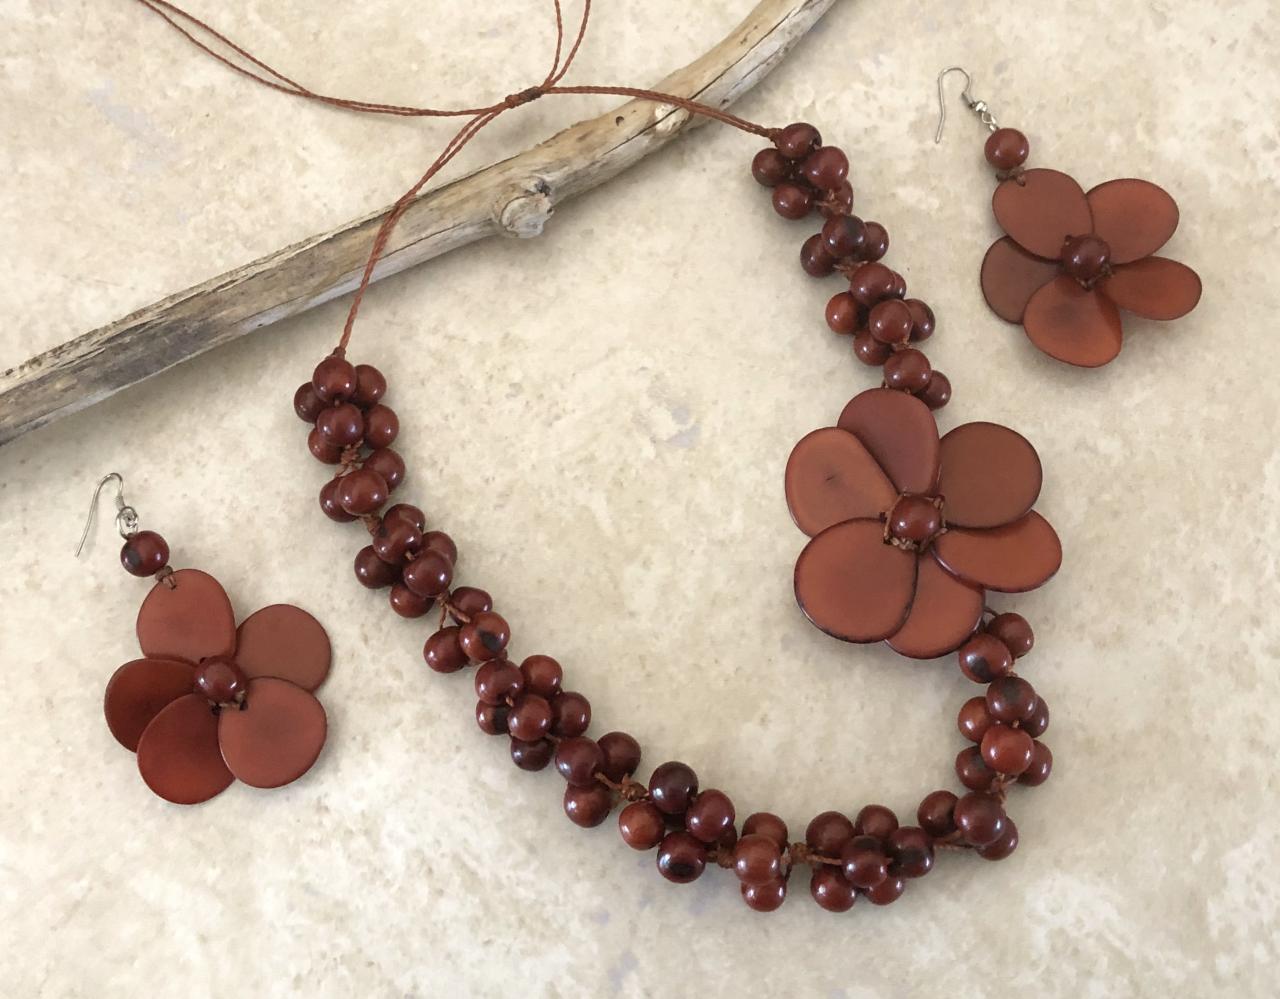 Brown Tagua Nut Necklace And Earrings, Acai Seeds Necklace, Statement Necklace, Summer Necklace, Vegan Necklace, Beach Necklace, Flower Neck